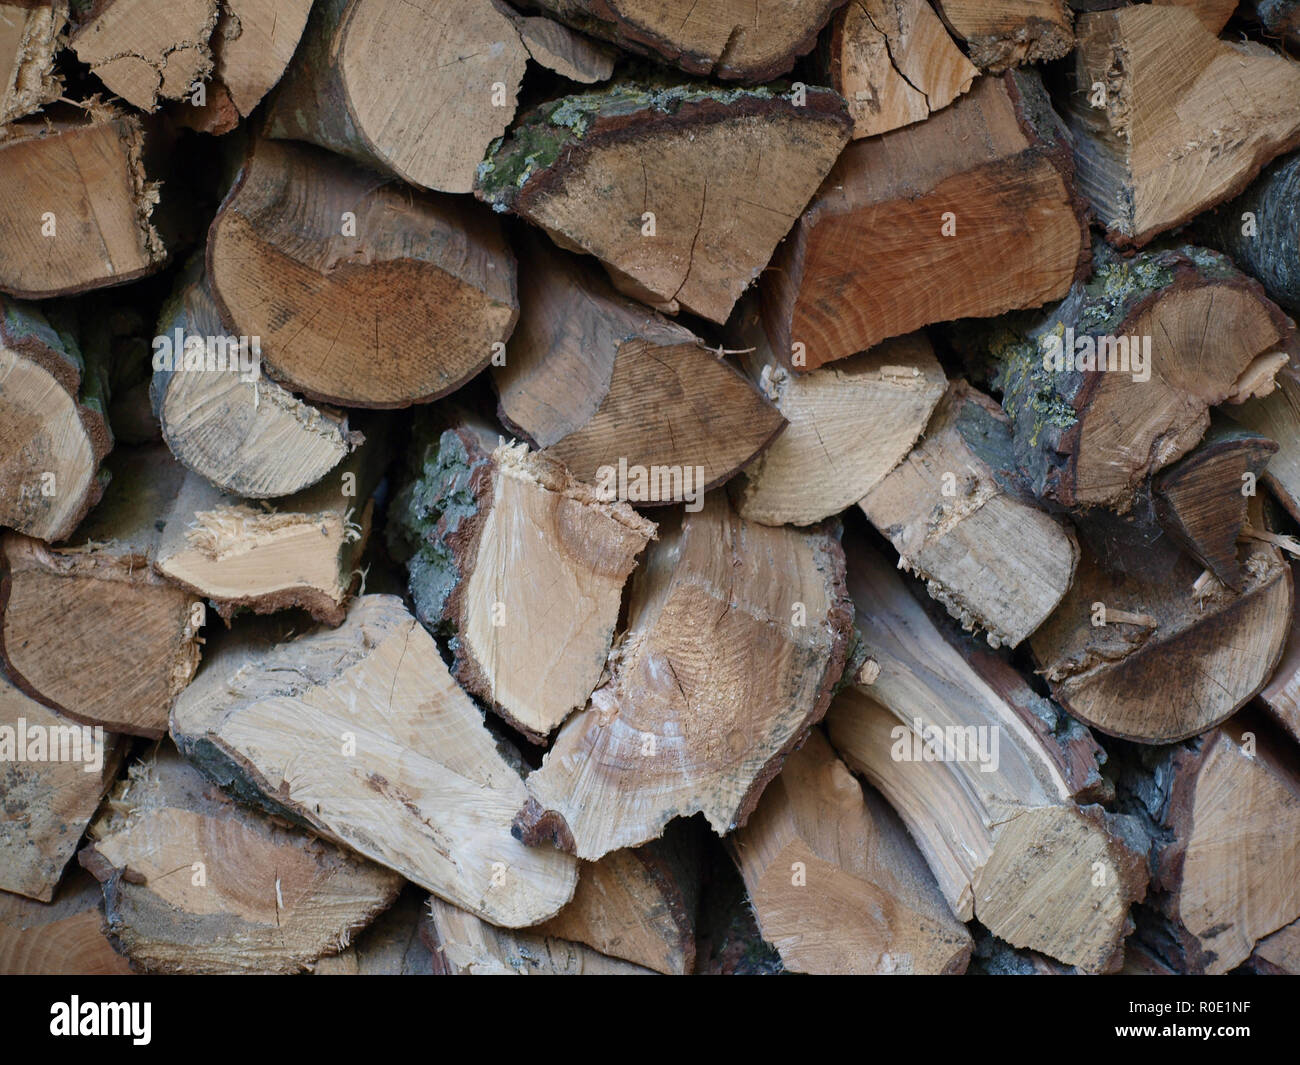 Detail of a pile of firewood Stock Photo